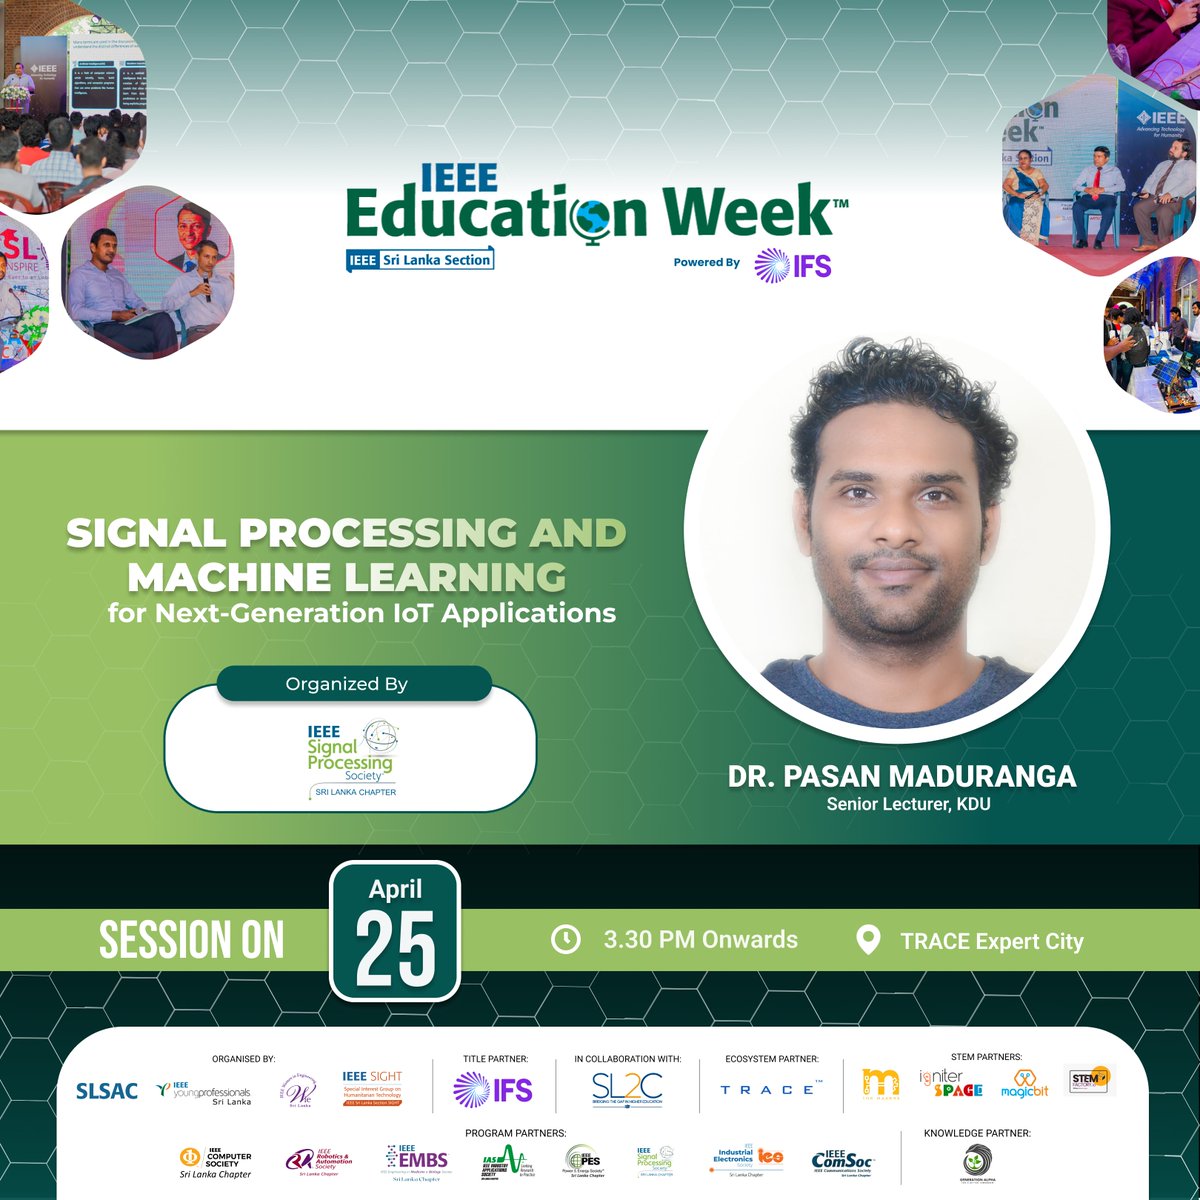 Step into the world of next-generation IoT applications with our session on 'Signal Processing and Machine Learning' at IEEE Education Week Sri Lanka 2024! 

#ieee #slsac #ypsl #wiesl #slsight #spssl #lka #ieeeeducationweek #EducationAtIEEE #signalprocessing #ml #iot